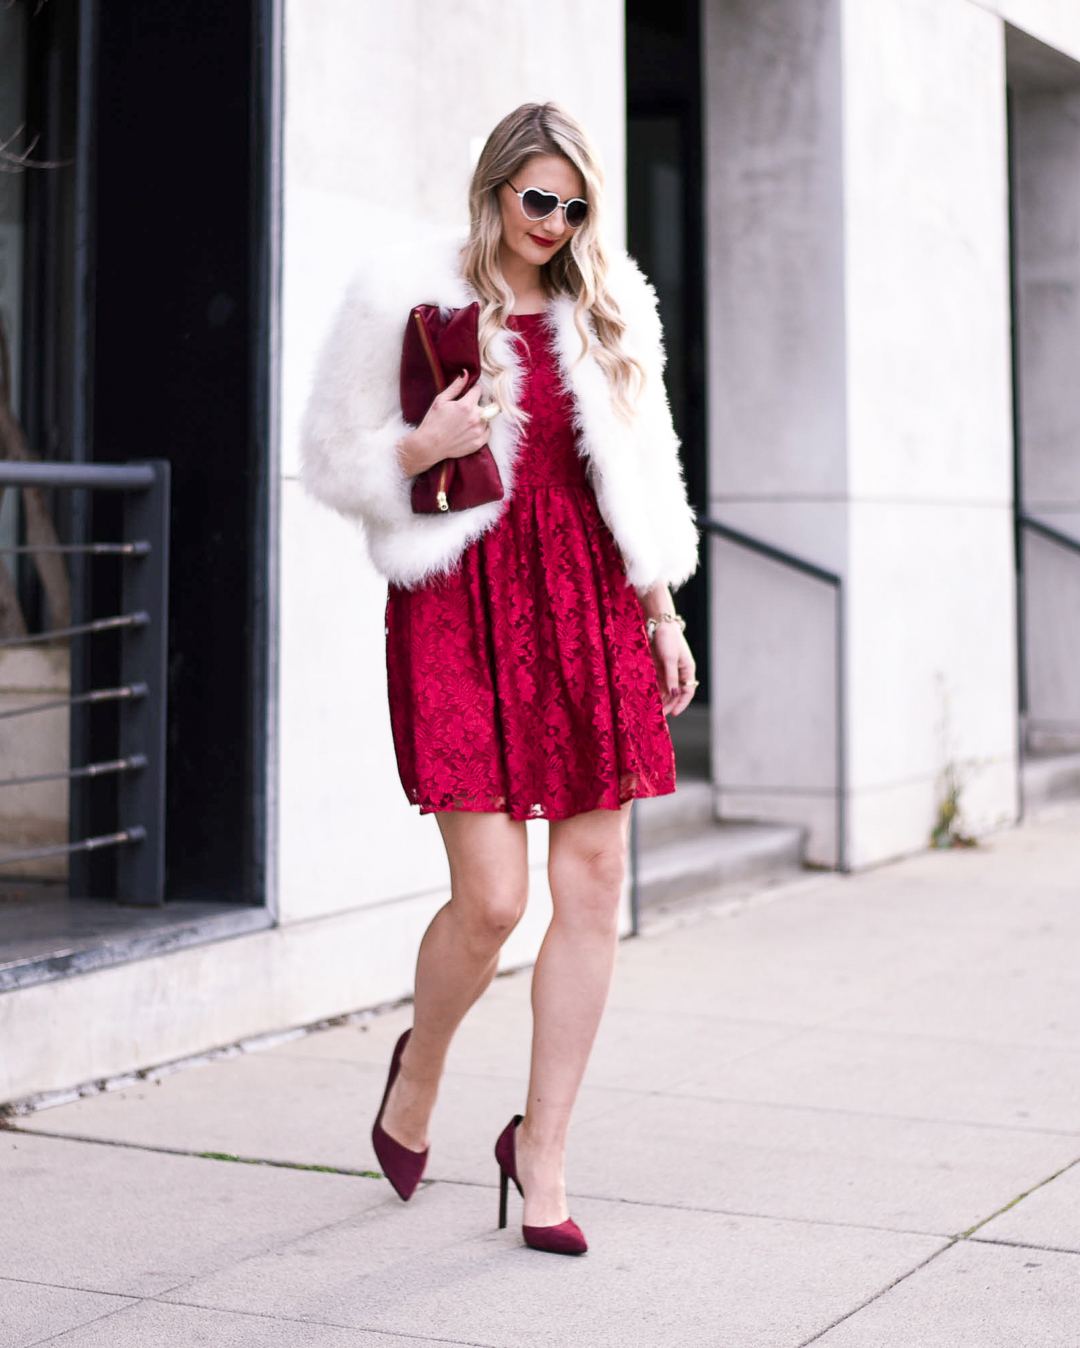 Date night red lace dress with a faux fur jacket. 